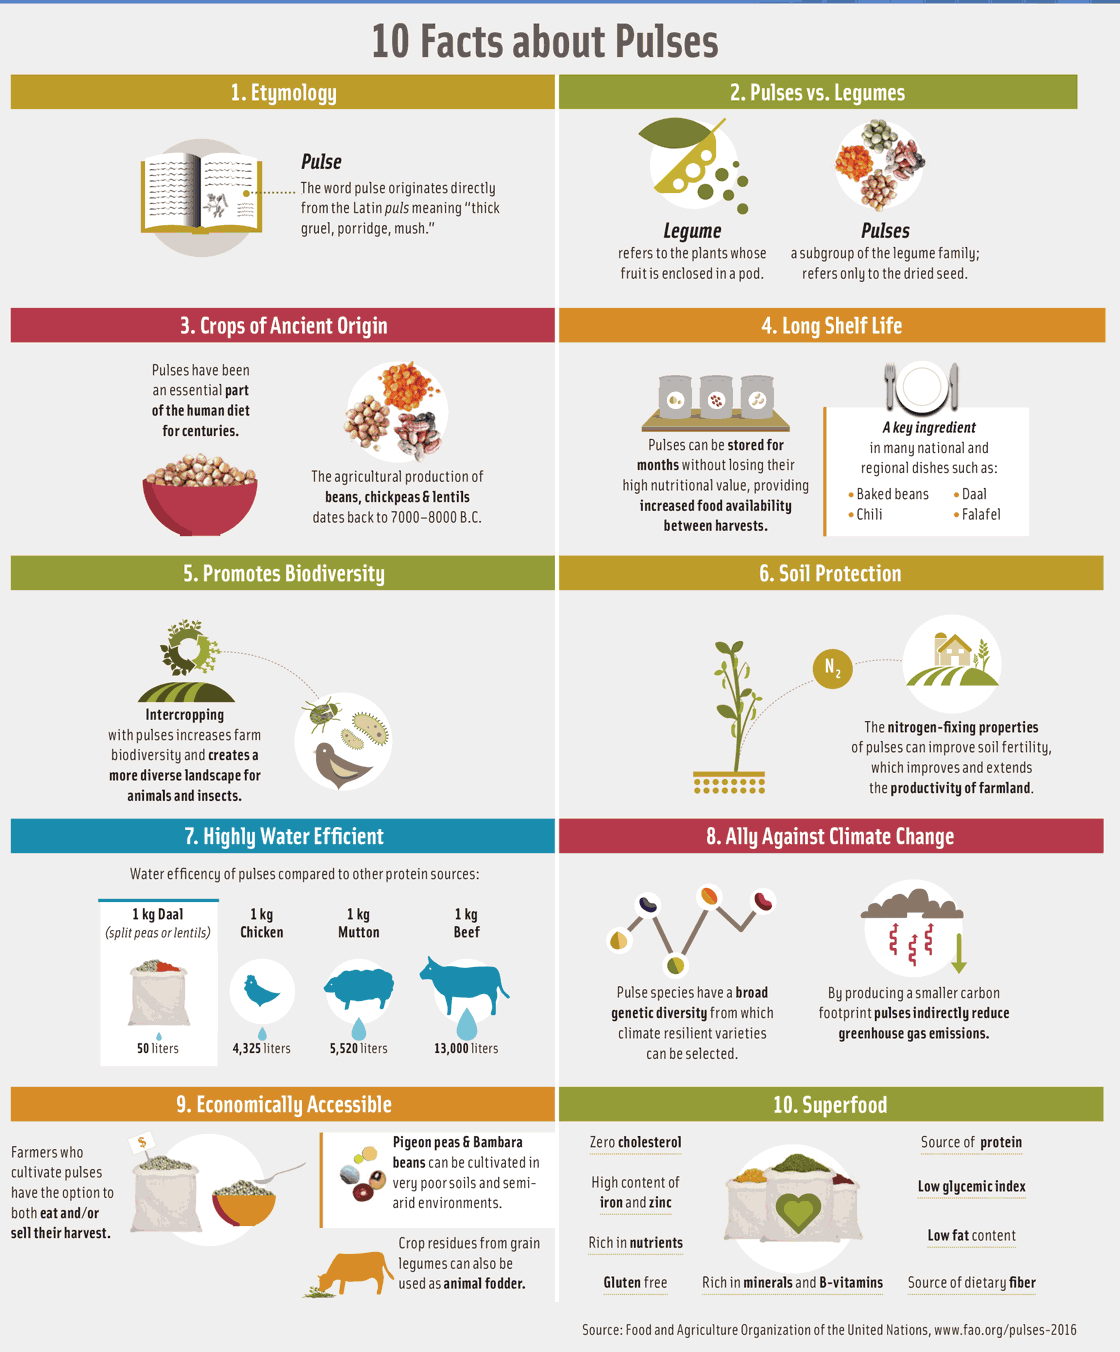 10 Facts about Pulses Source: Food and Agriculture Organization of the United Nations, www.fao.org/pulses-2016